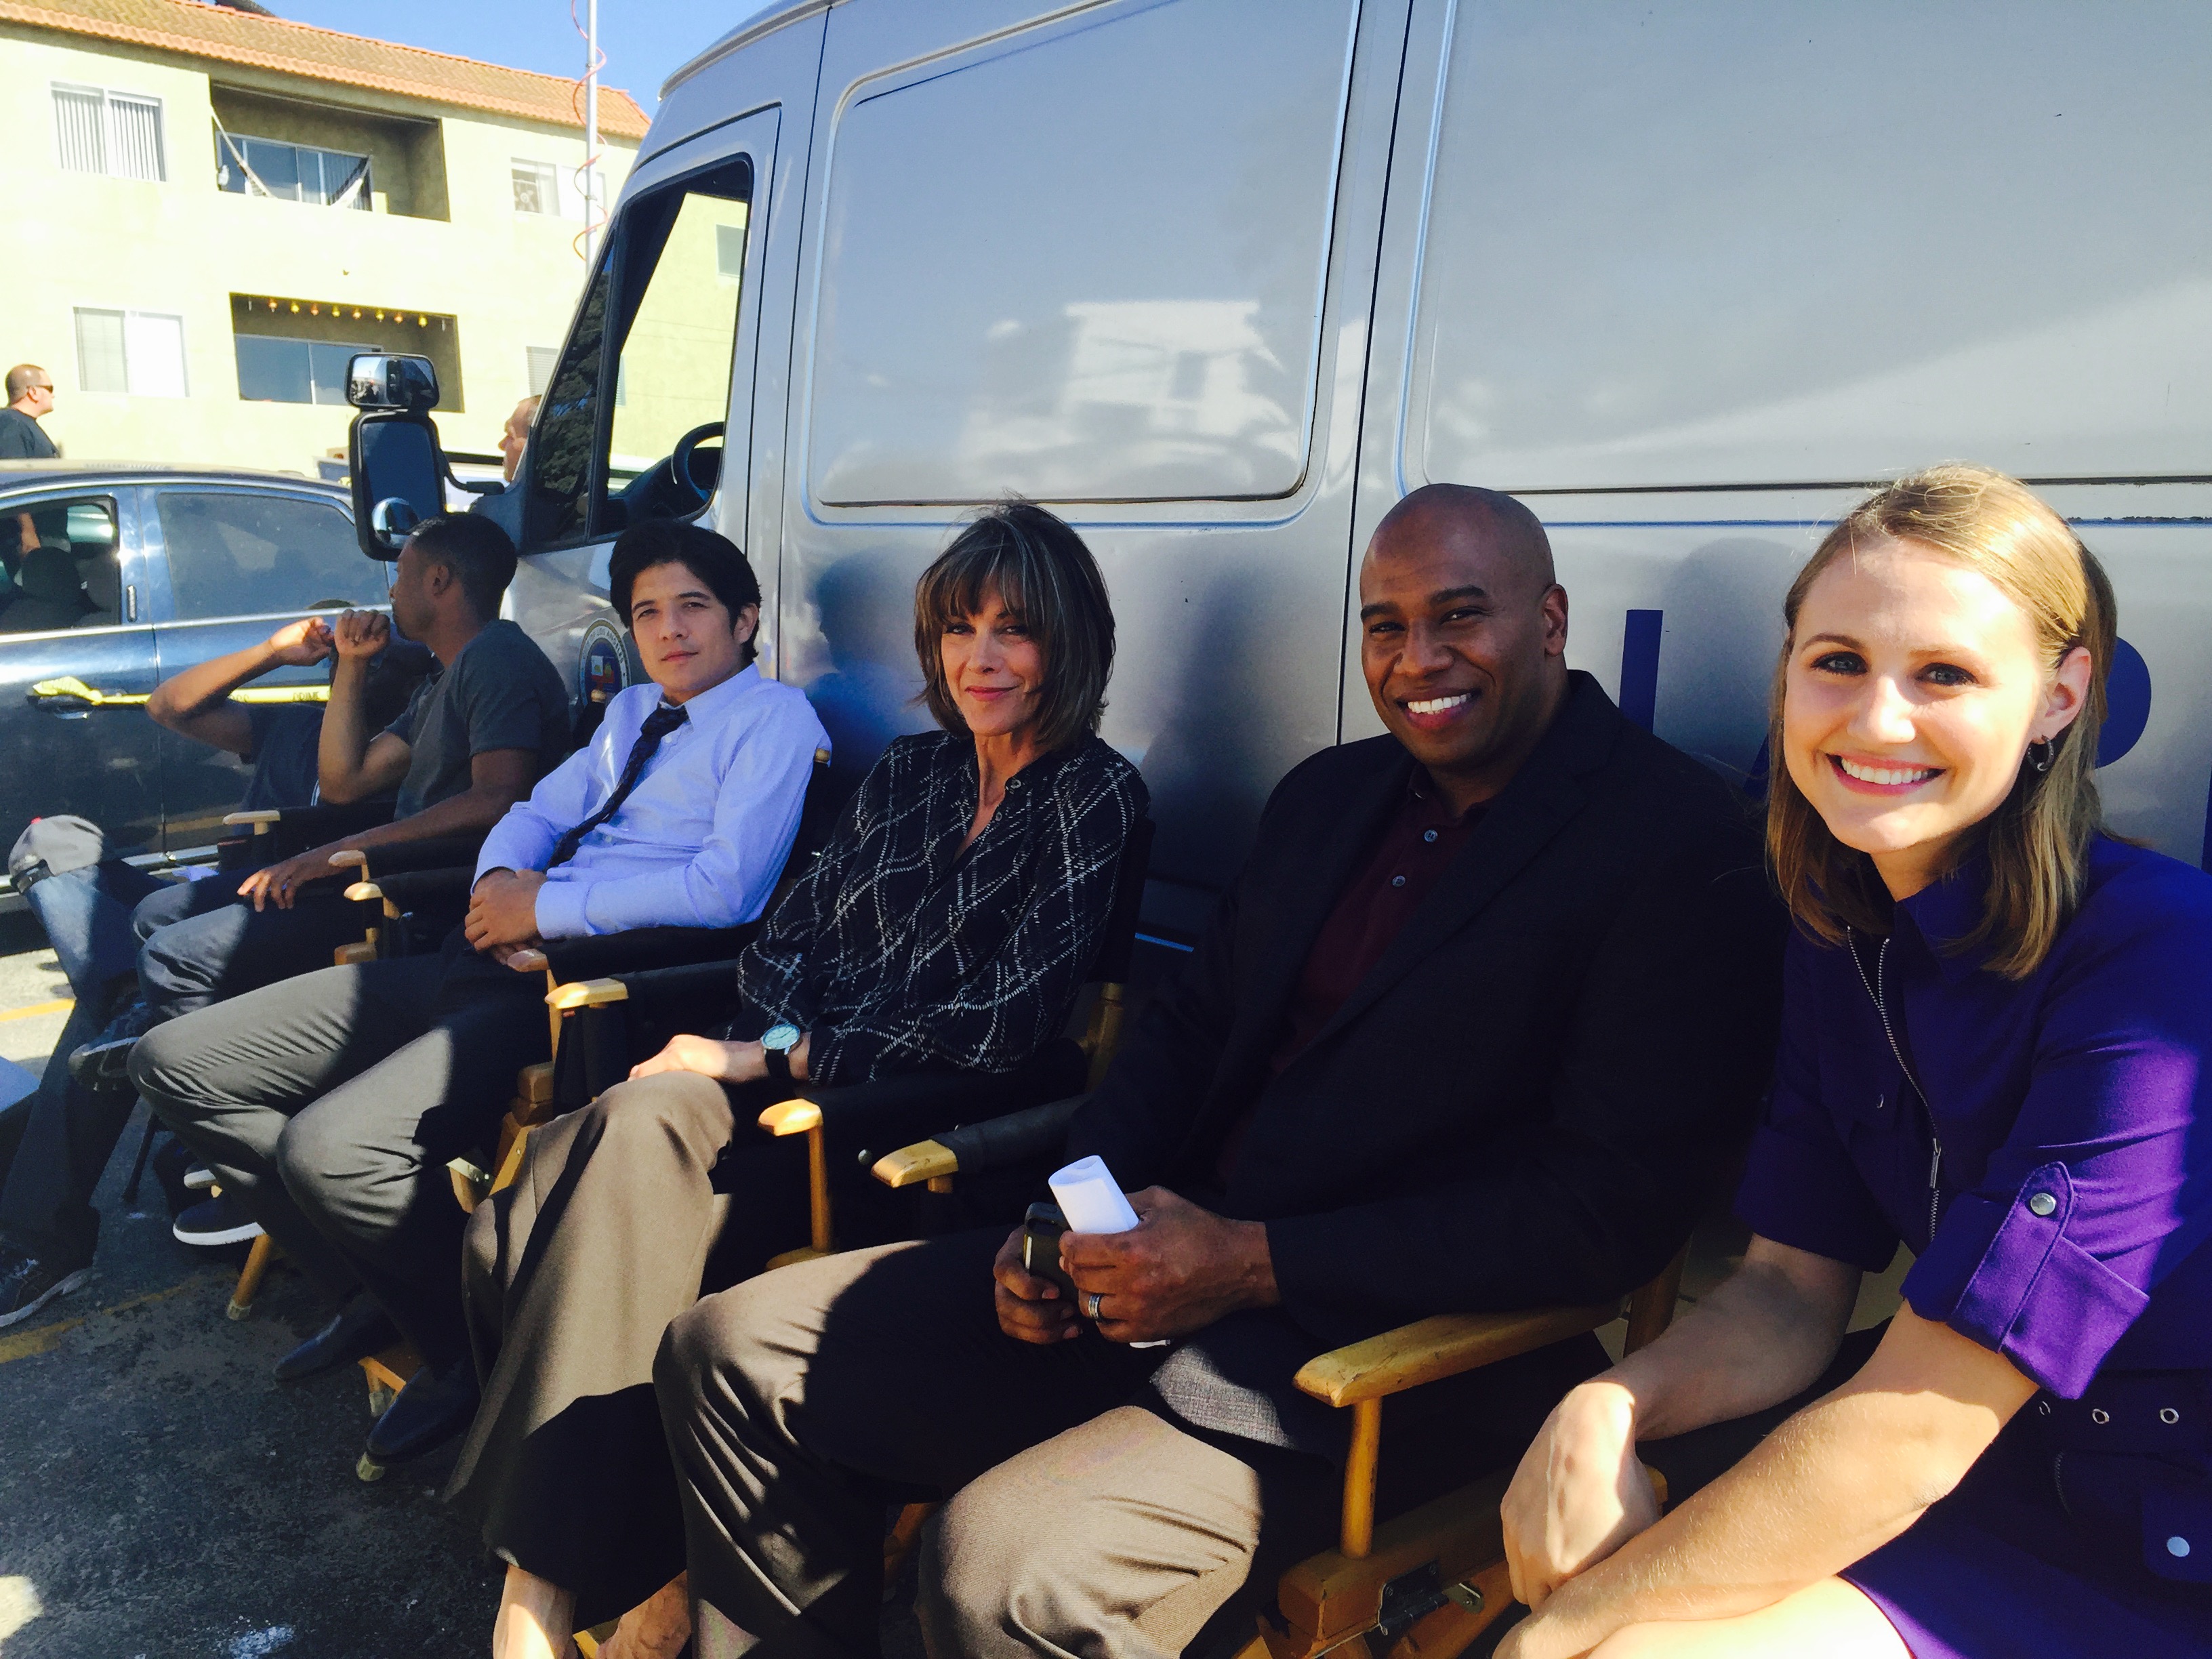 Maurice Hall, Justin Hires, John Foo, Wendie Malick and Caitlin Knisley on set of CBS's Rush Hour.